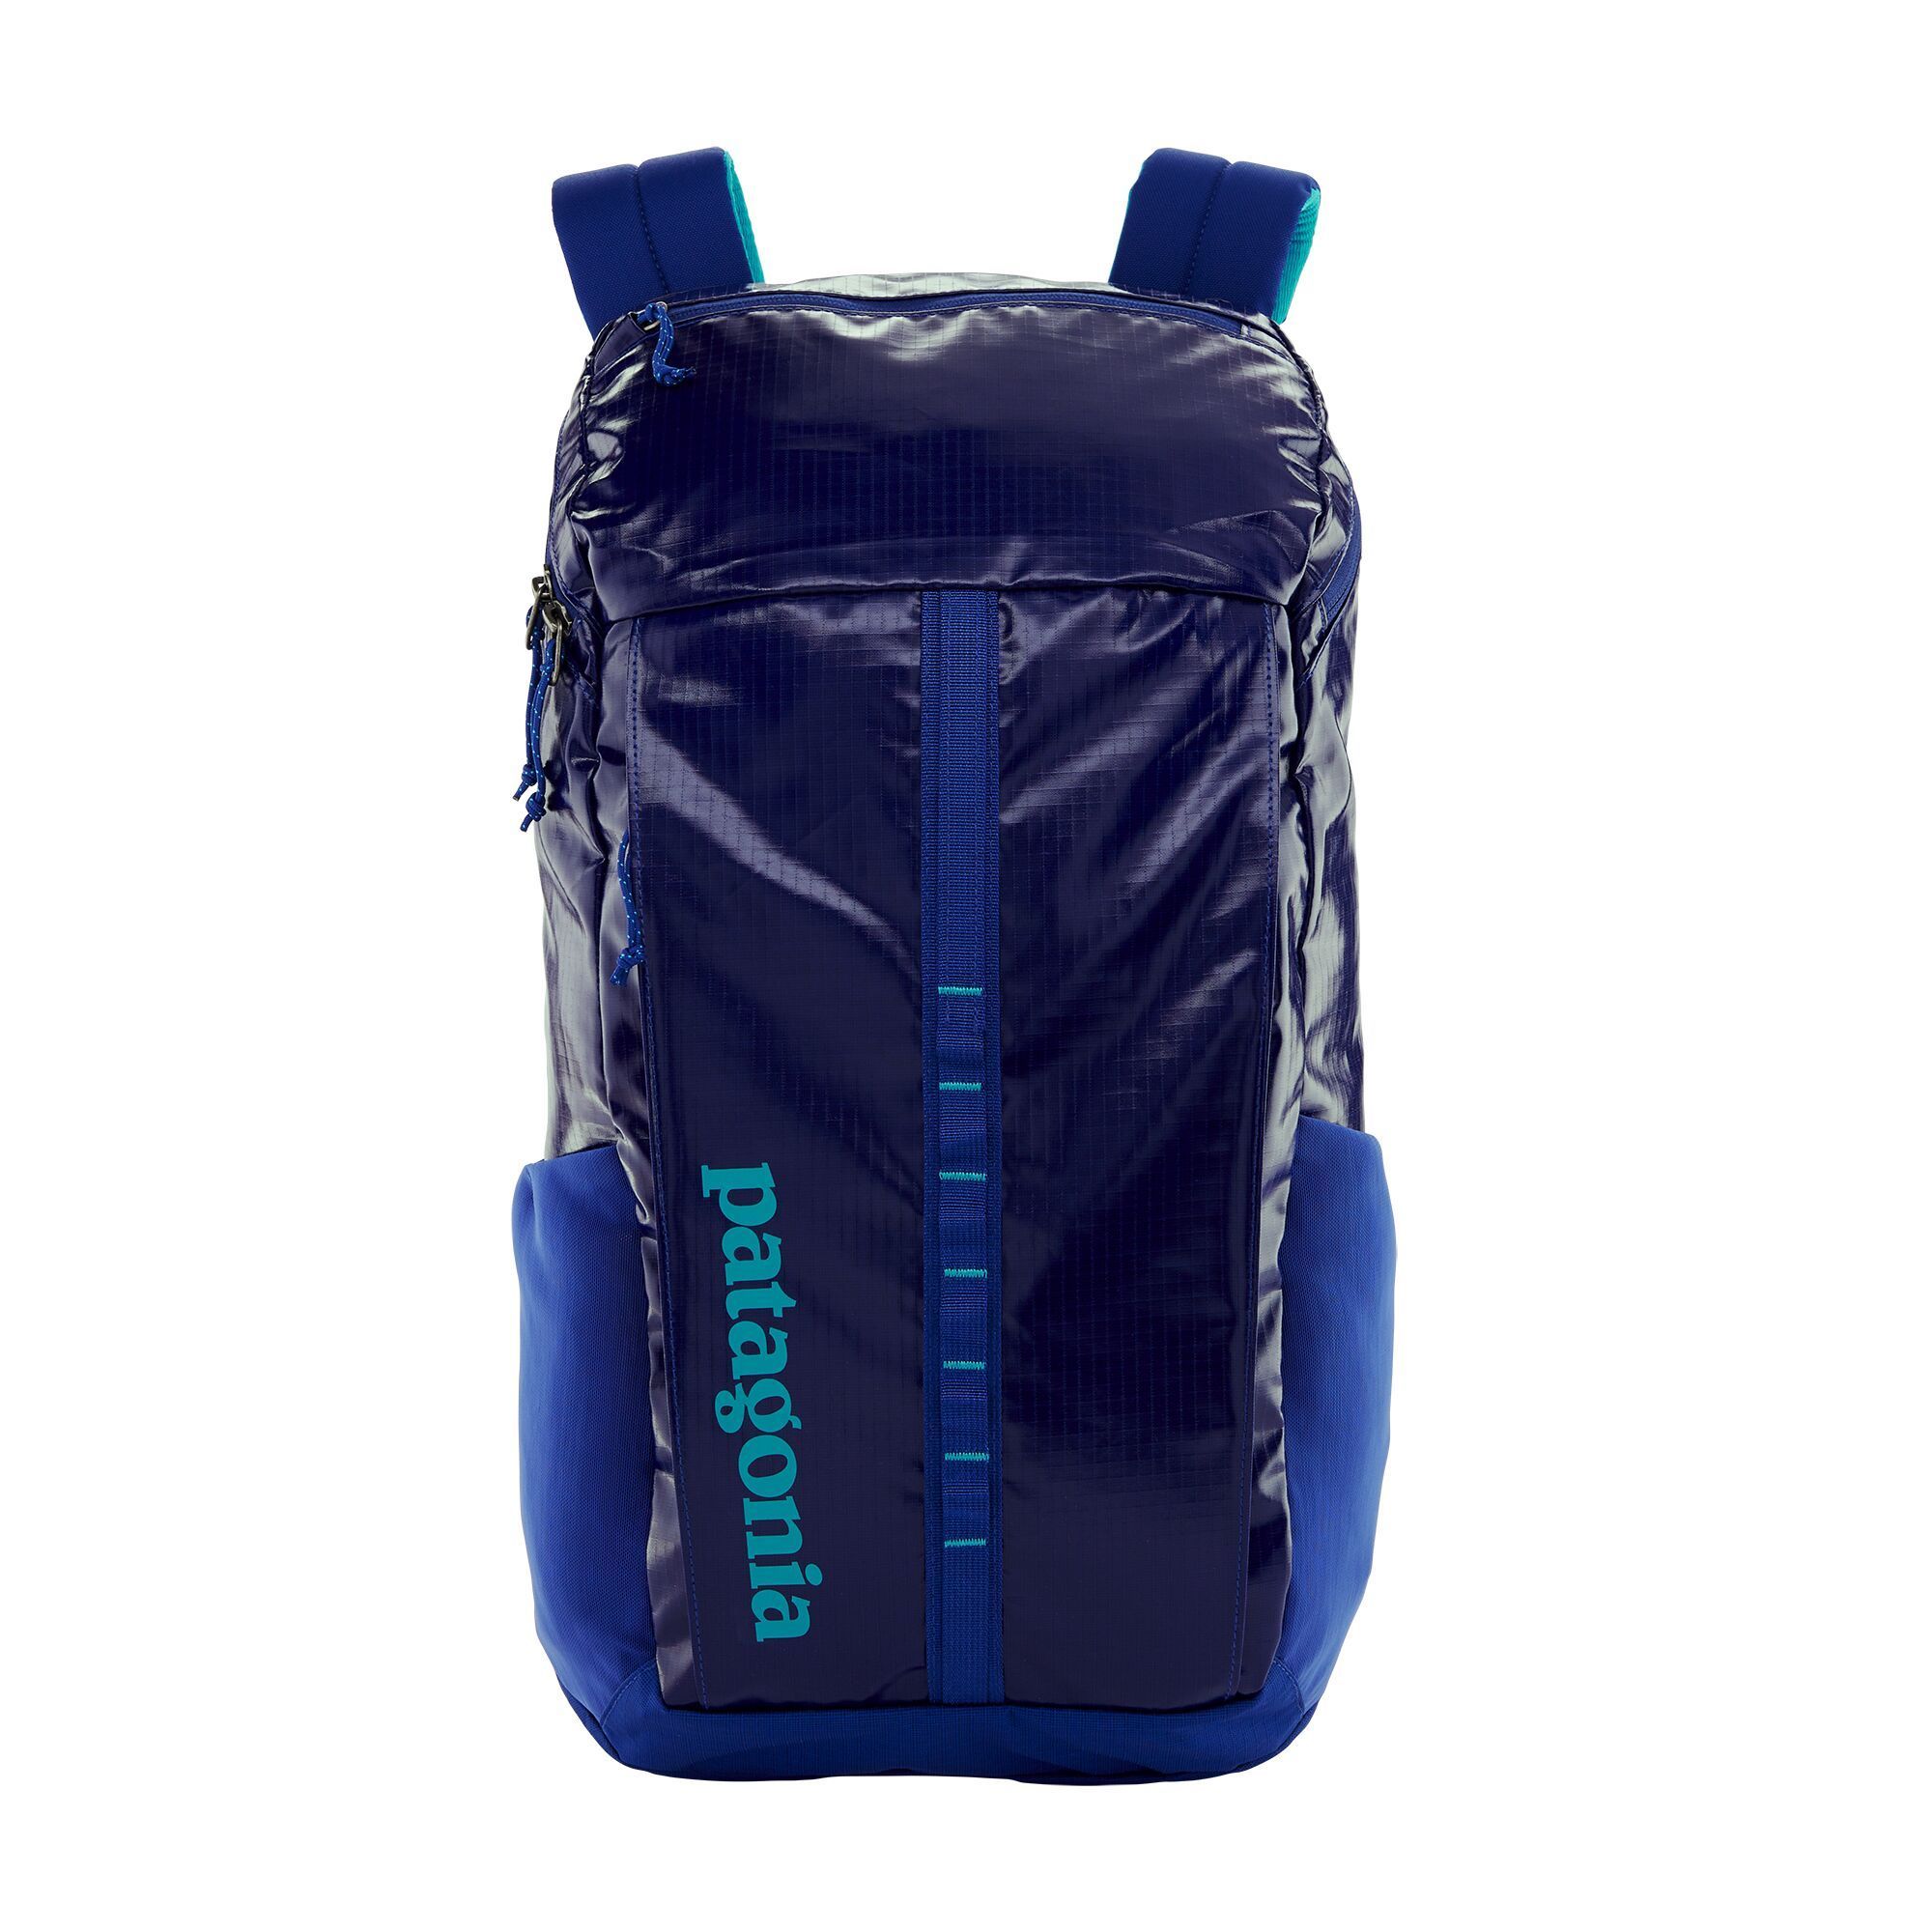 Patagonia Black Hole Pack 25L - Backpack made from Recycled Polyester, Cobalt Blue